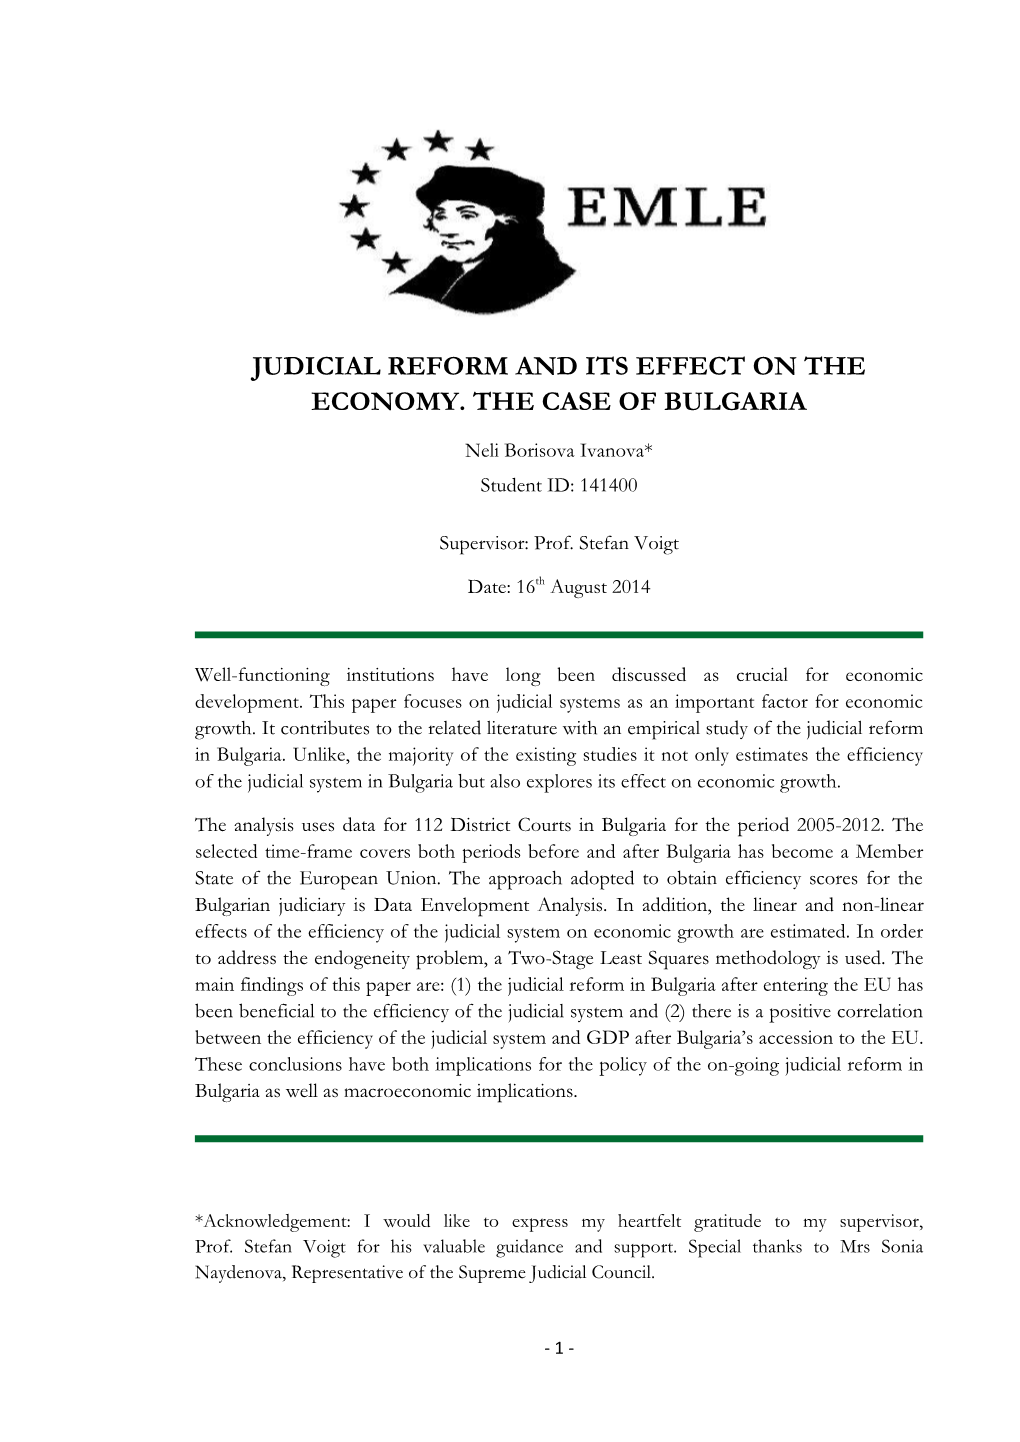 Judicial Reform and Its Effect on the Economy